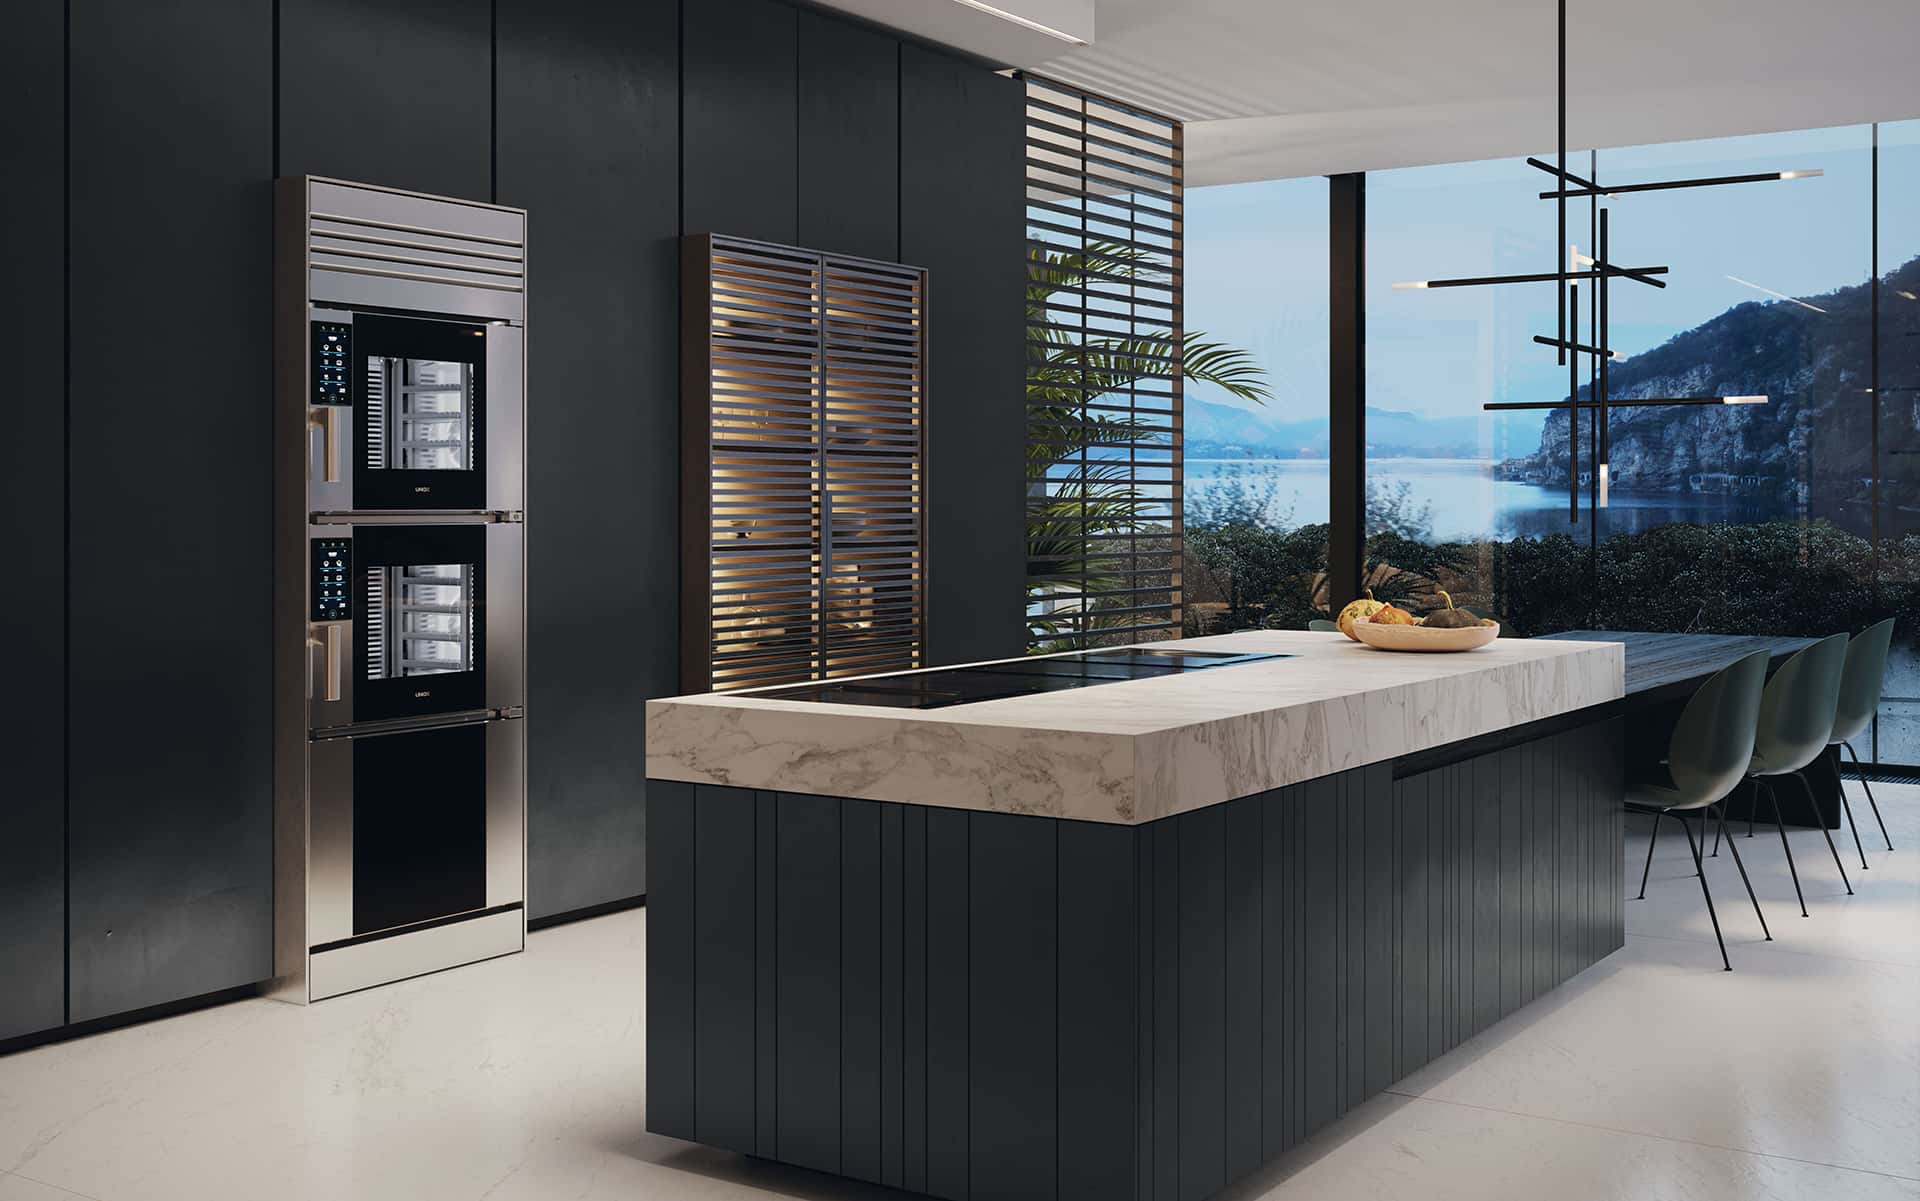 SuperOven Model 1S luxury oven by Unox Casa inserted in a elegant kitchen overlooking Lake Maggiore